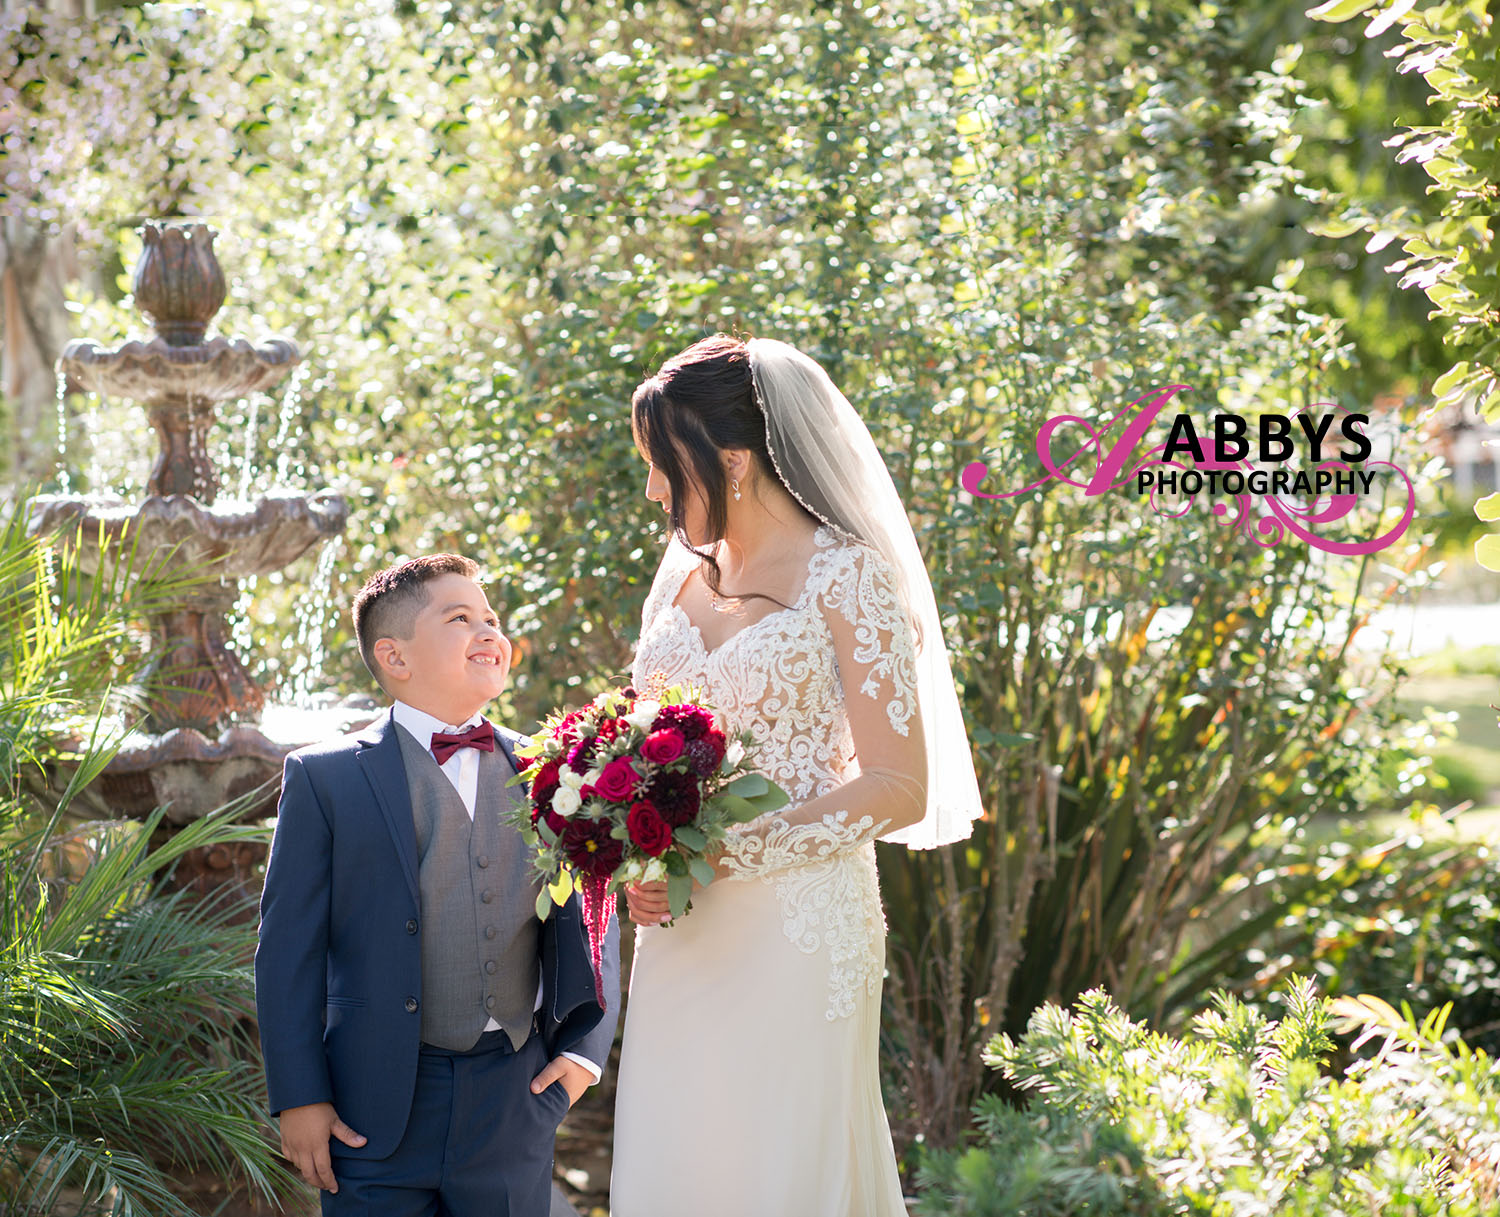 This boy is happy on his mother’s wedding day, and Abbys Photography captured the moment. 